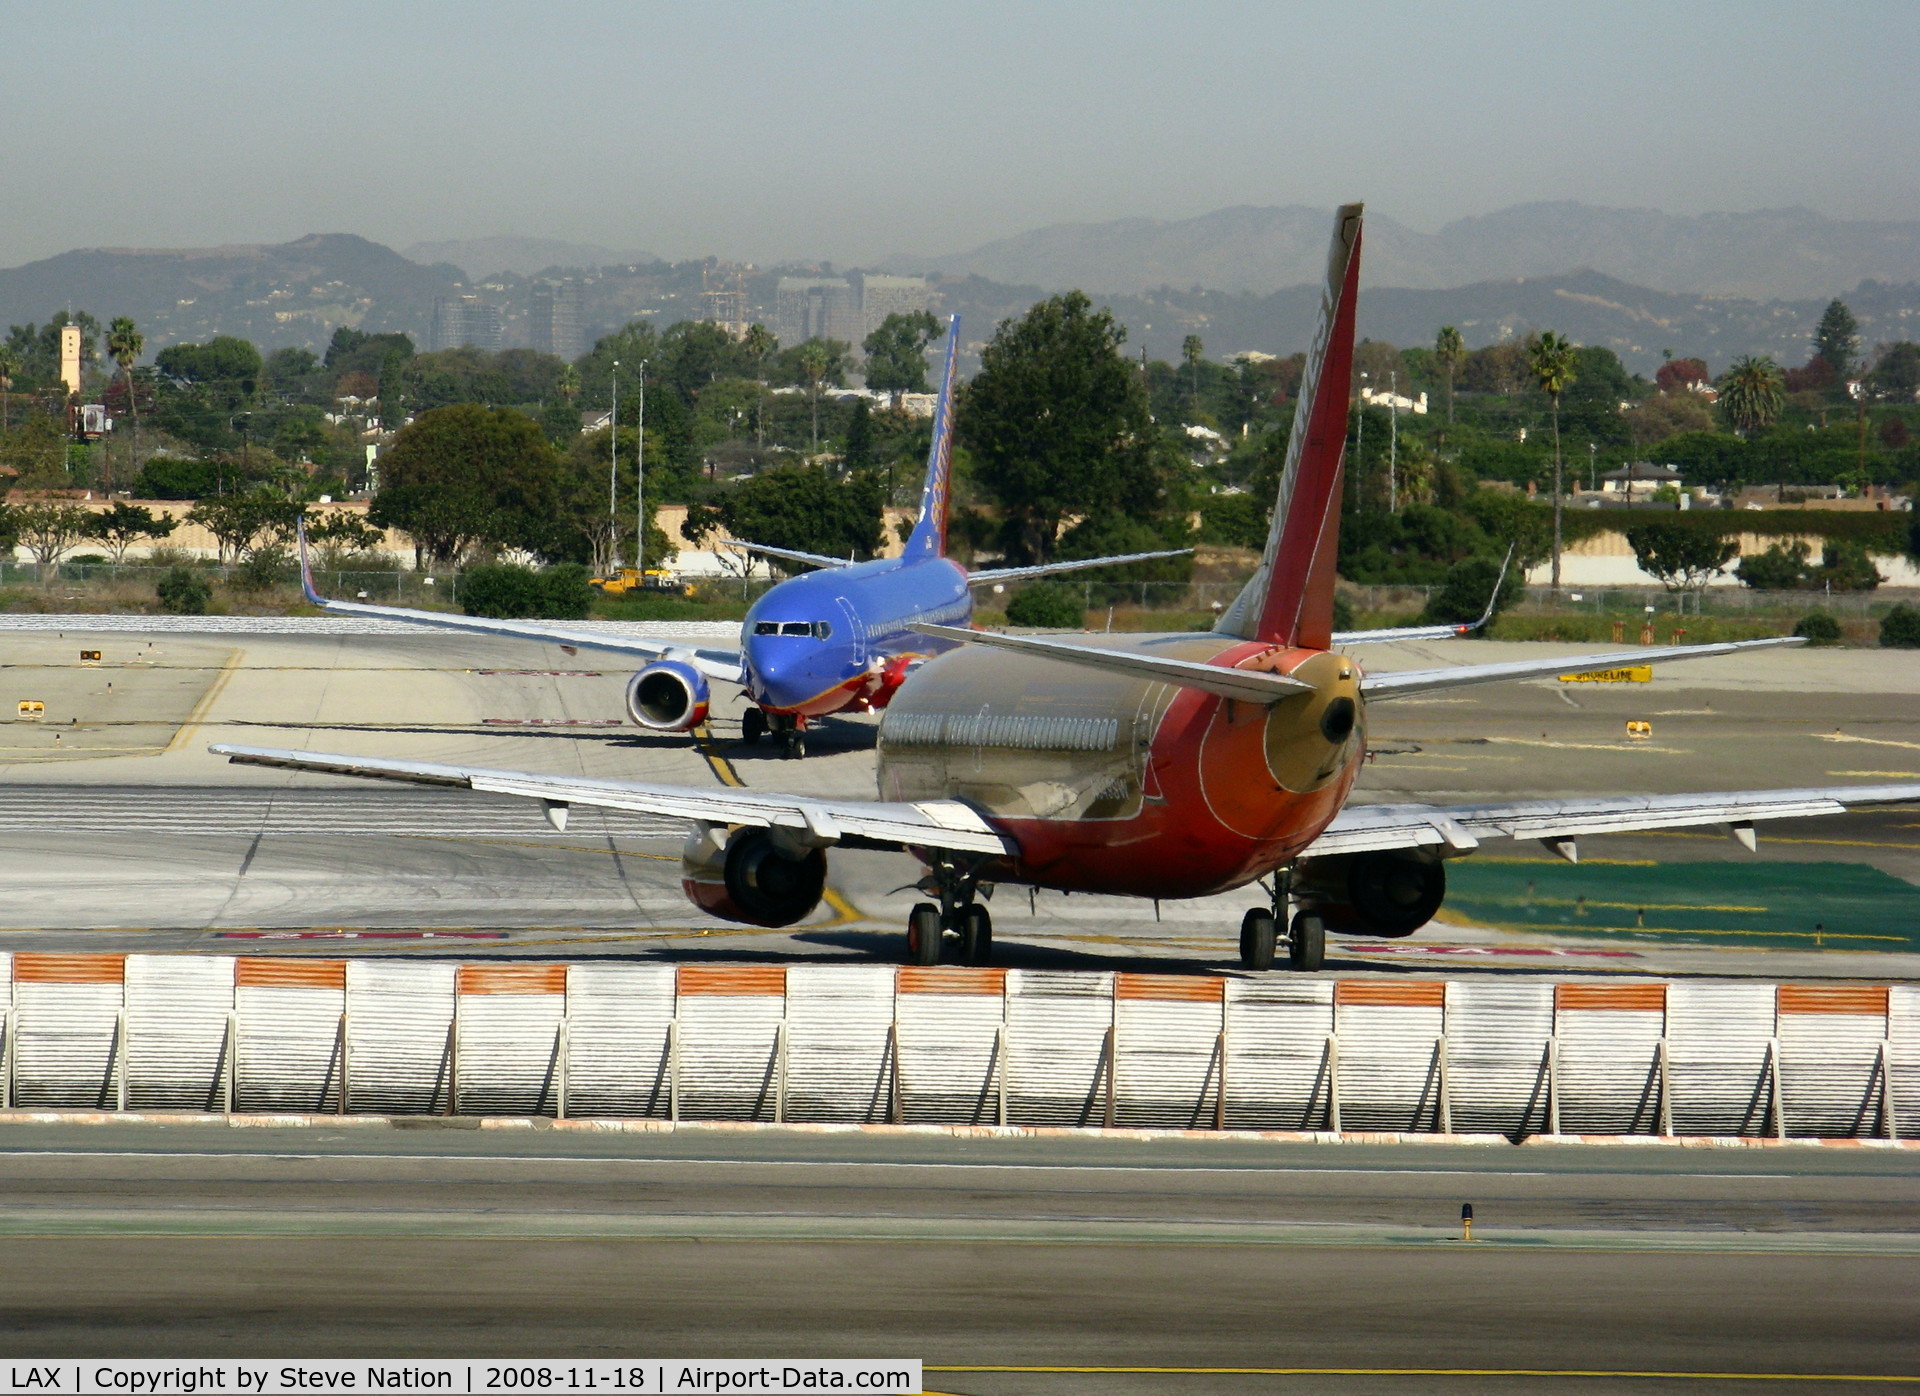 Los Angeles International Airport (LAX) - The old (N349SW) and the new (N907WN) face off for 